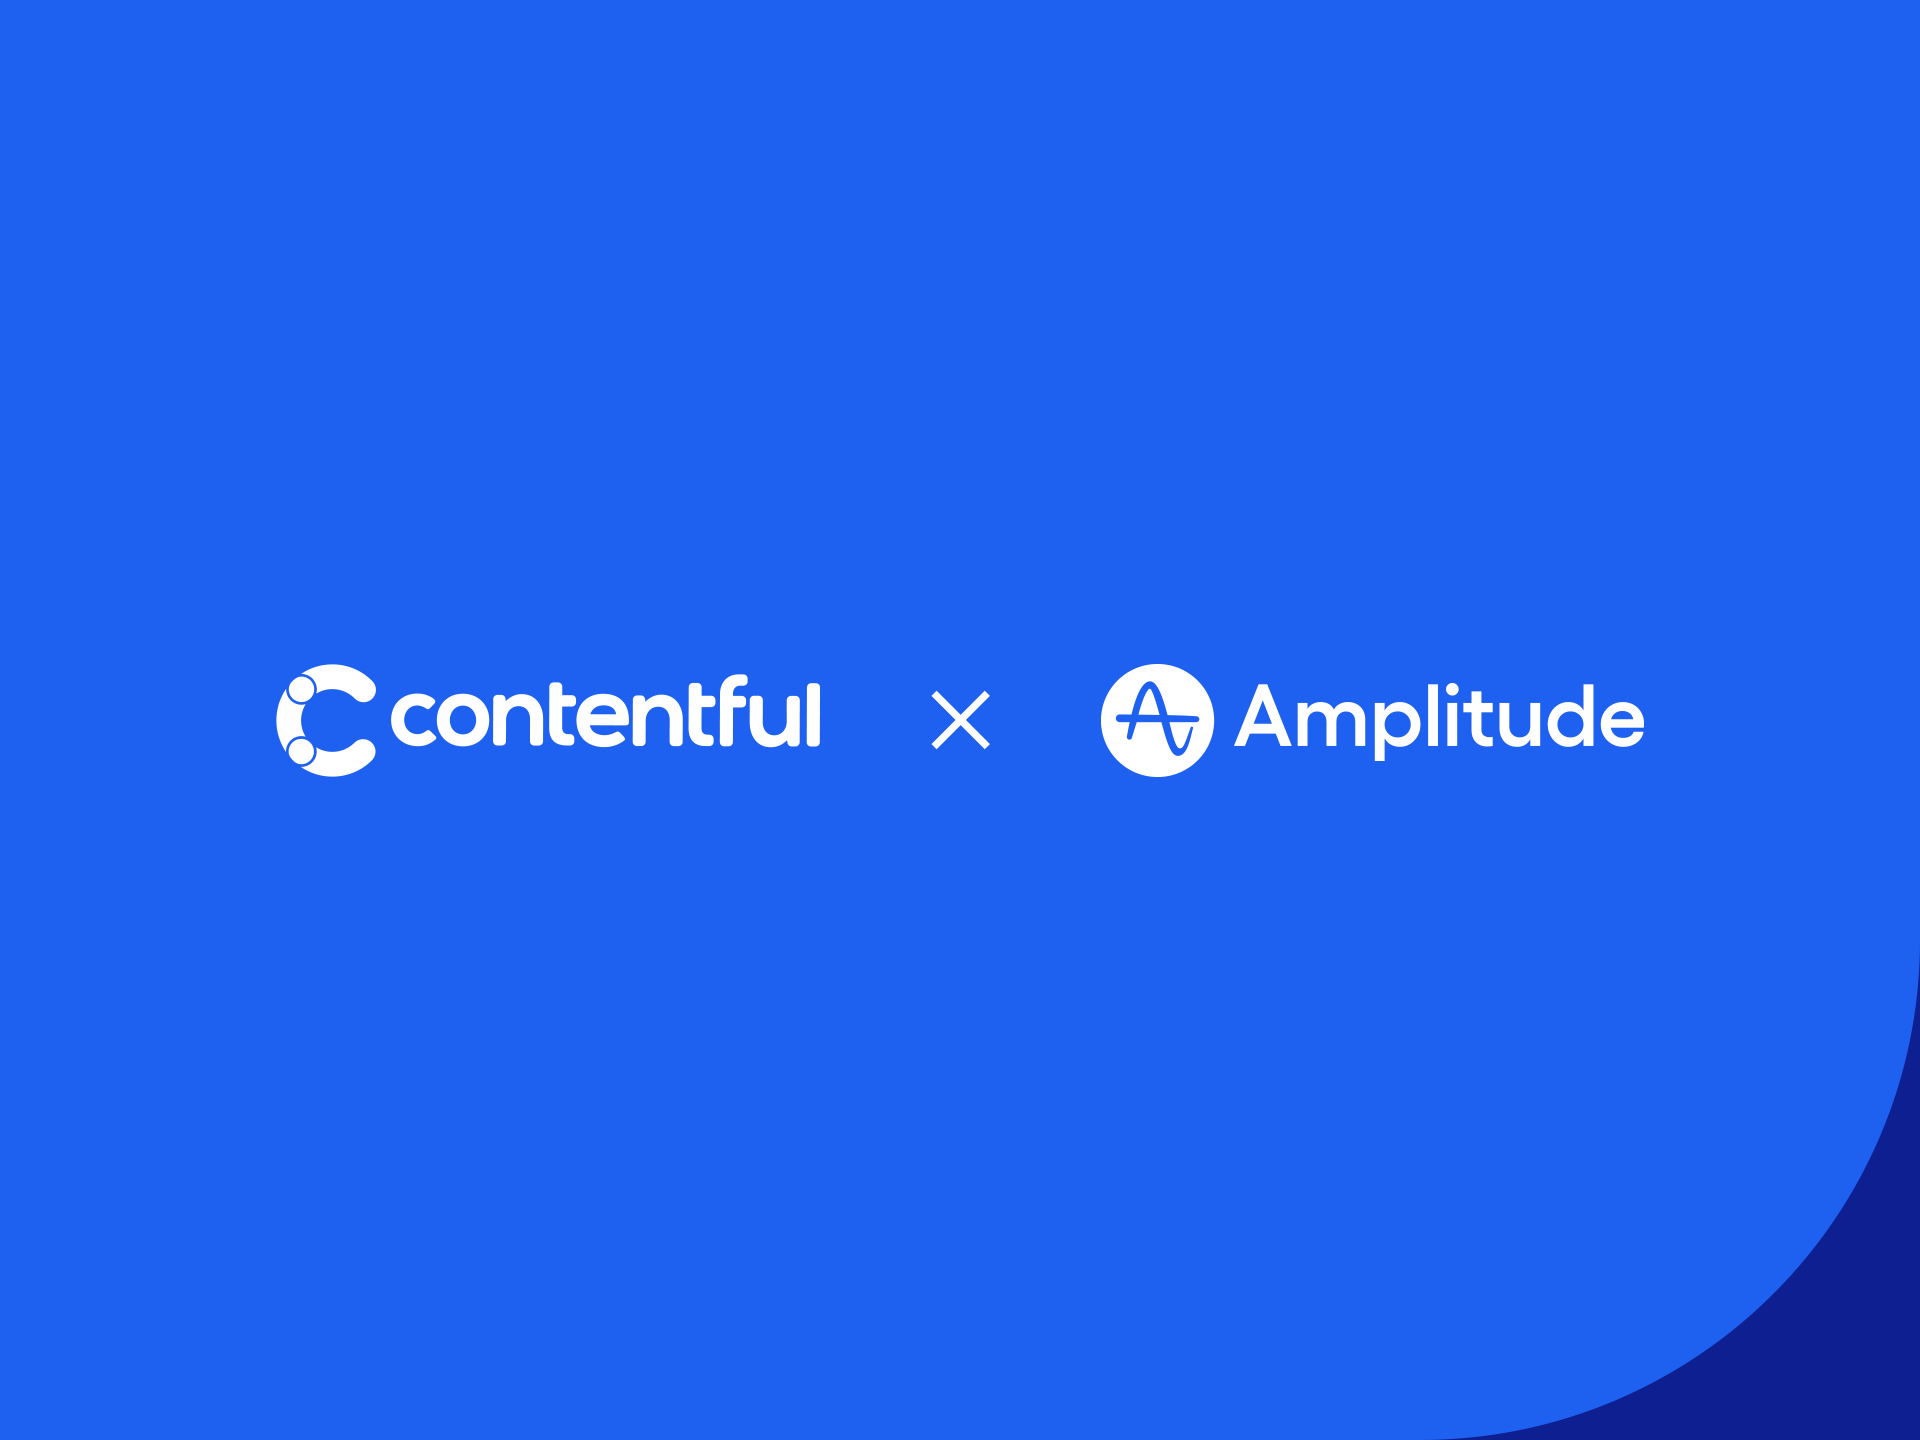 Learn how Amplitude’s new Contentful integration unlocks no-code experiments to build better web experiences without engineering support 